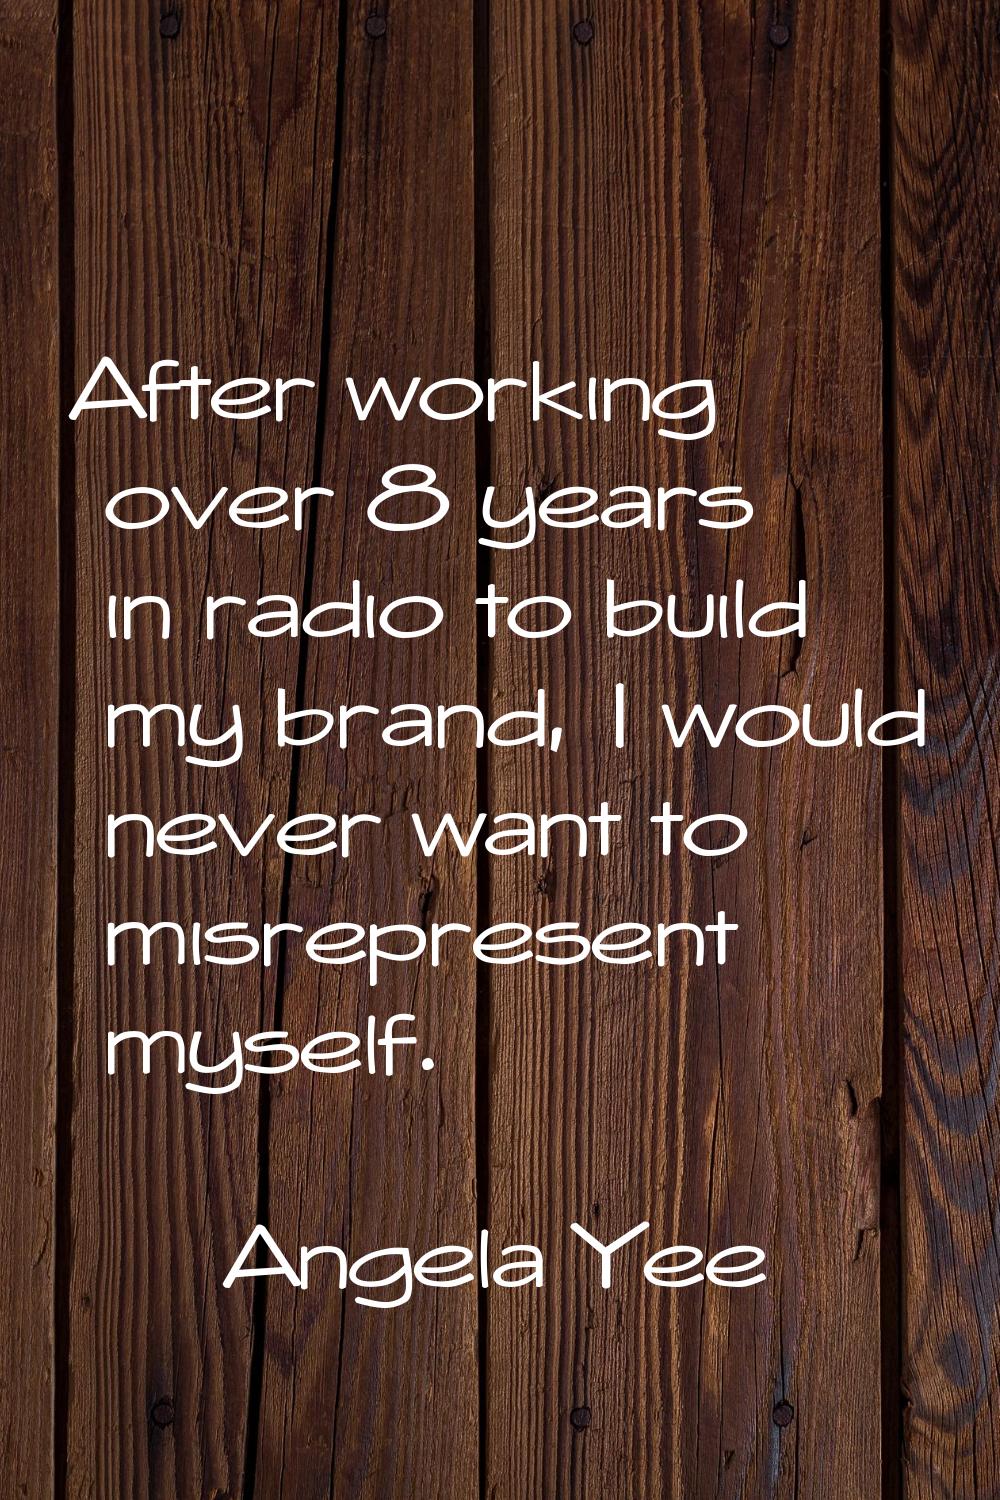 After working over 8 years in radio to build my brand, I would never want to misrepresent myself.